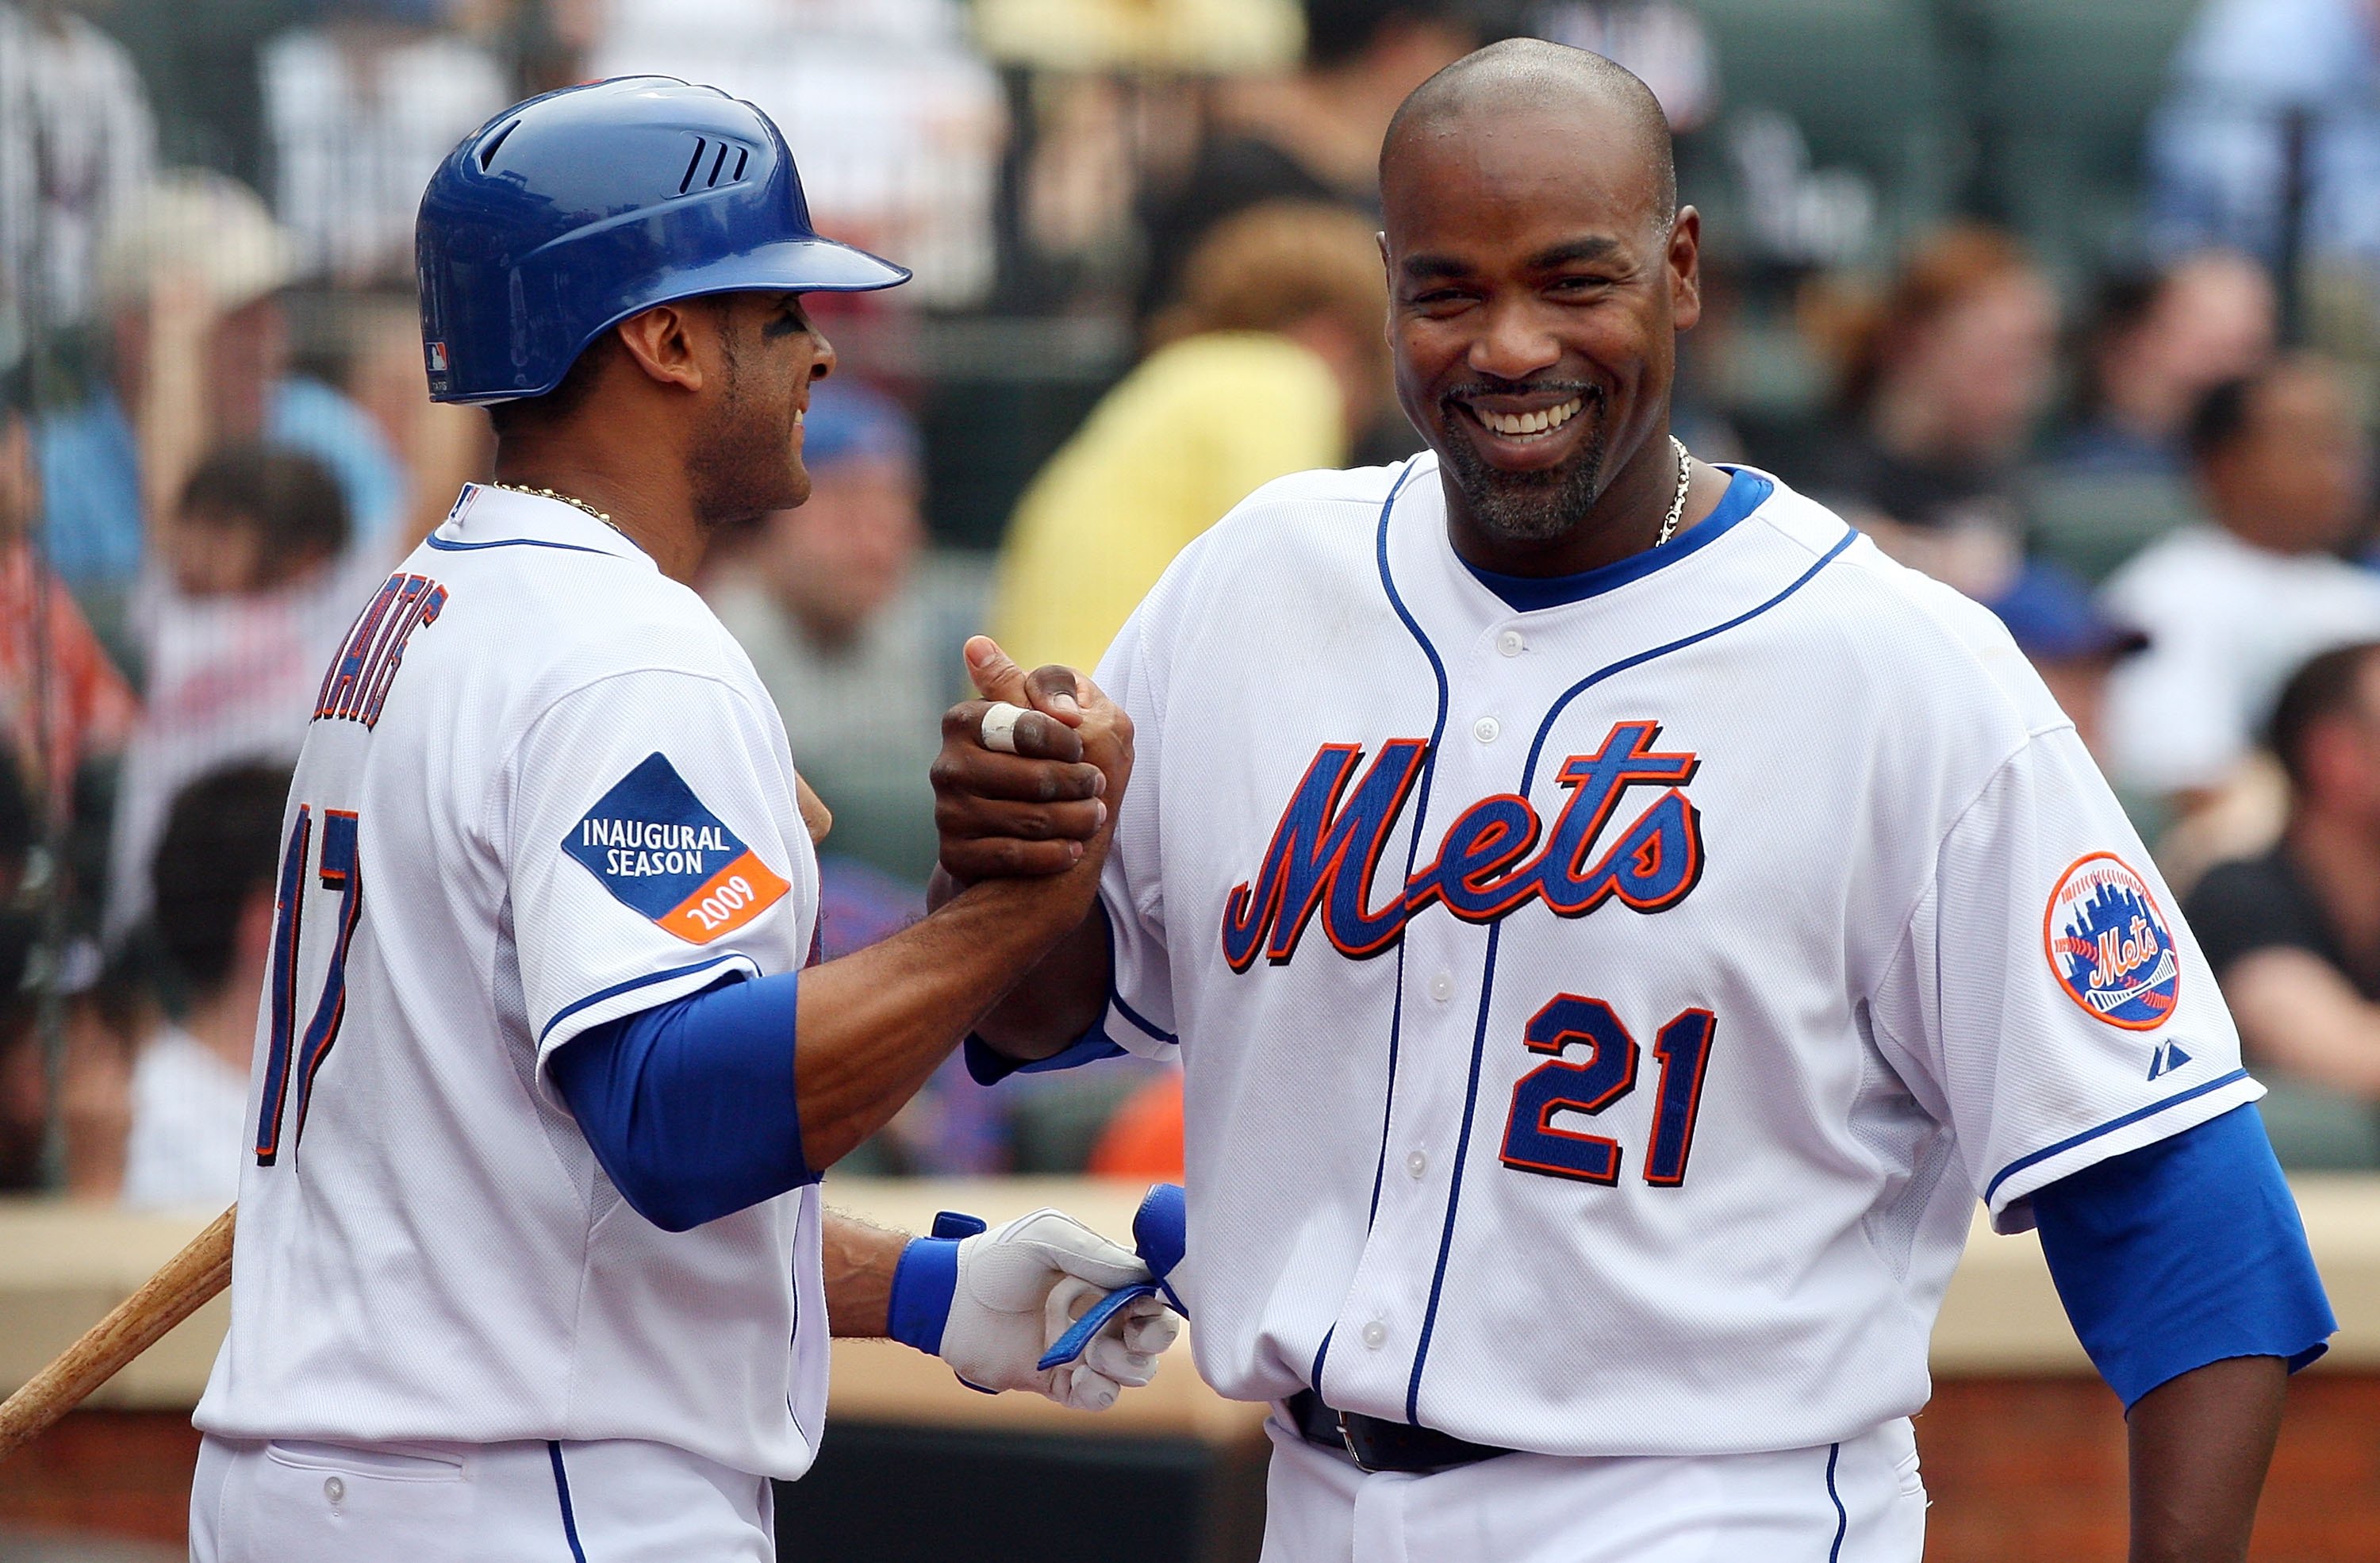 NEW YORK - MAY 09:  Carlos Delgado #21 of the New York Mets celebrates with teammate Fernando Tatis #17 after scoring a run against the Pittsburgh Pirates on May 9, 2009 at Citi Field in the Flushing neighborhood of the Queens borough of New York City. Th